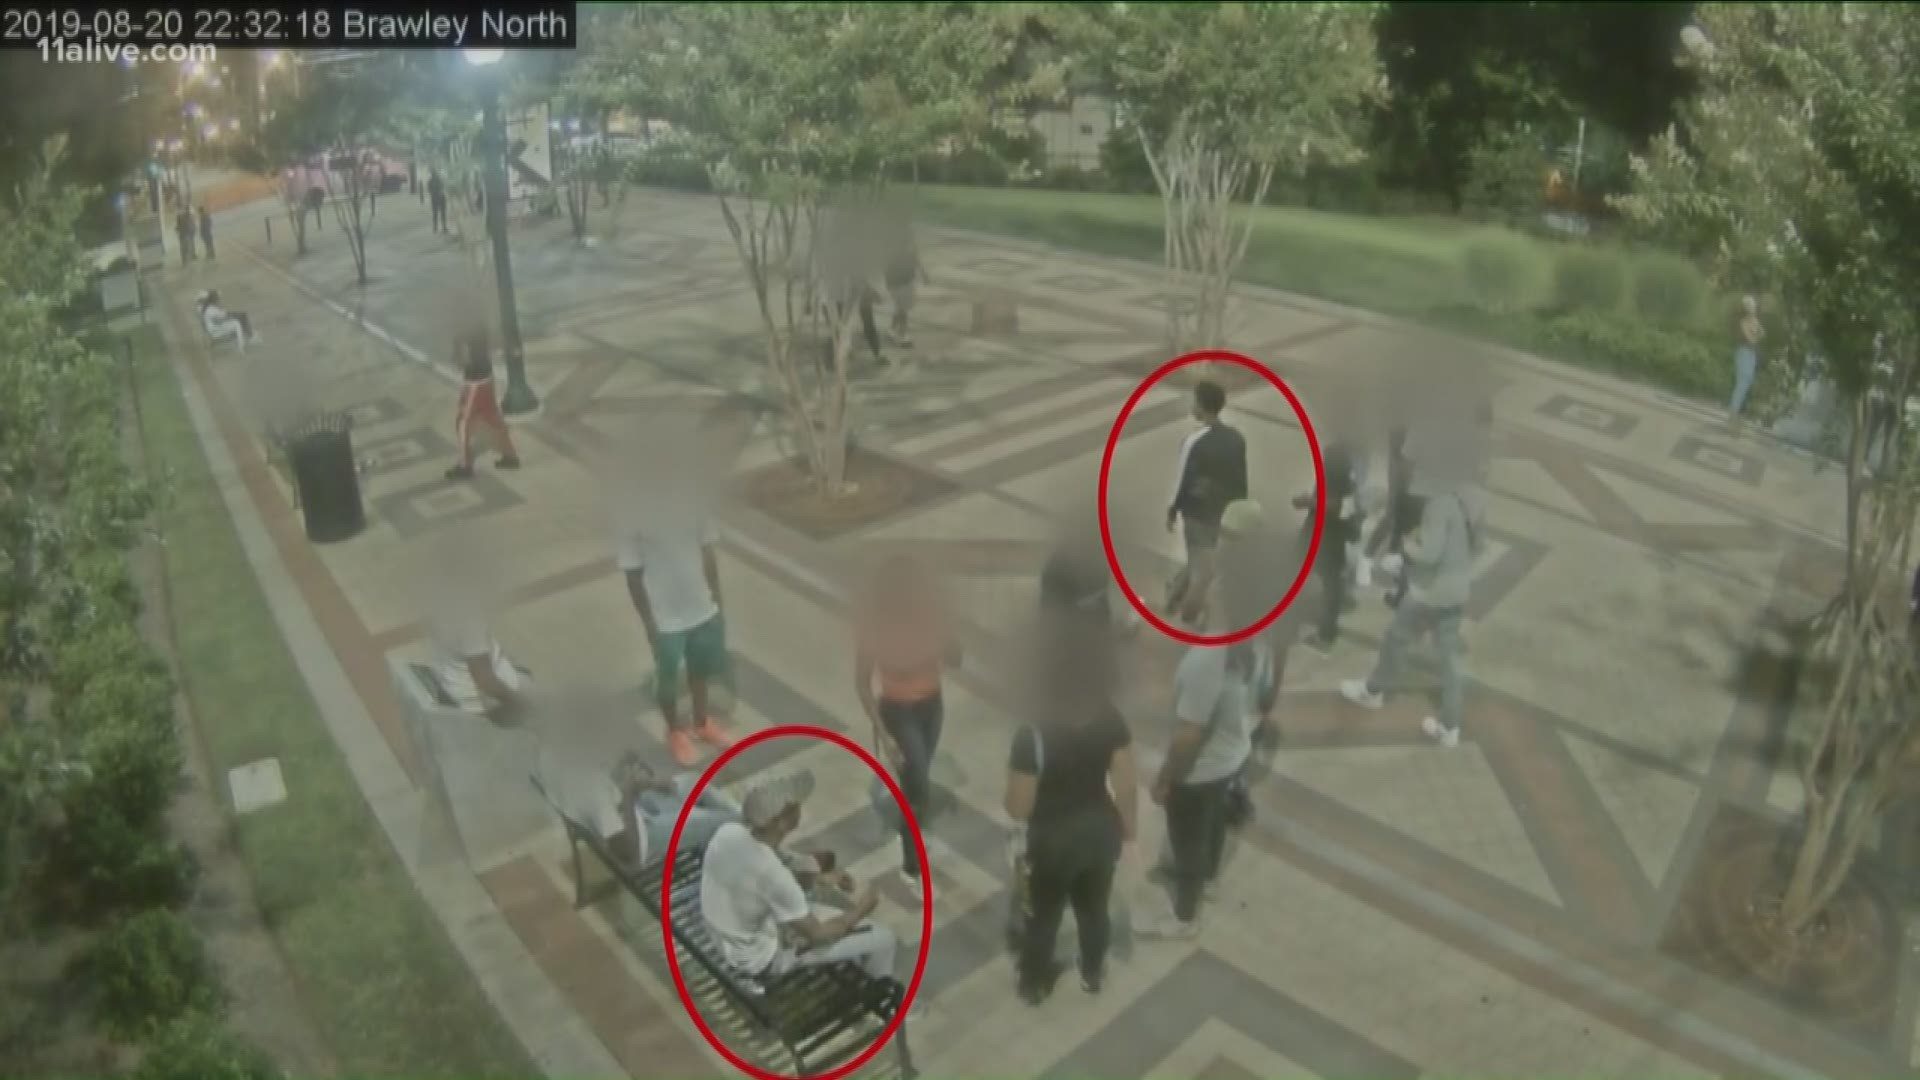 The new video shows the new suspect wearing a long sleeve black shirt with a thick white stripe down the arm.